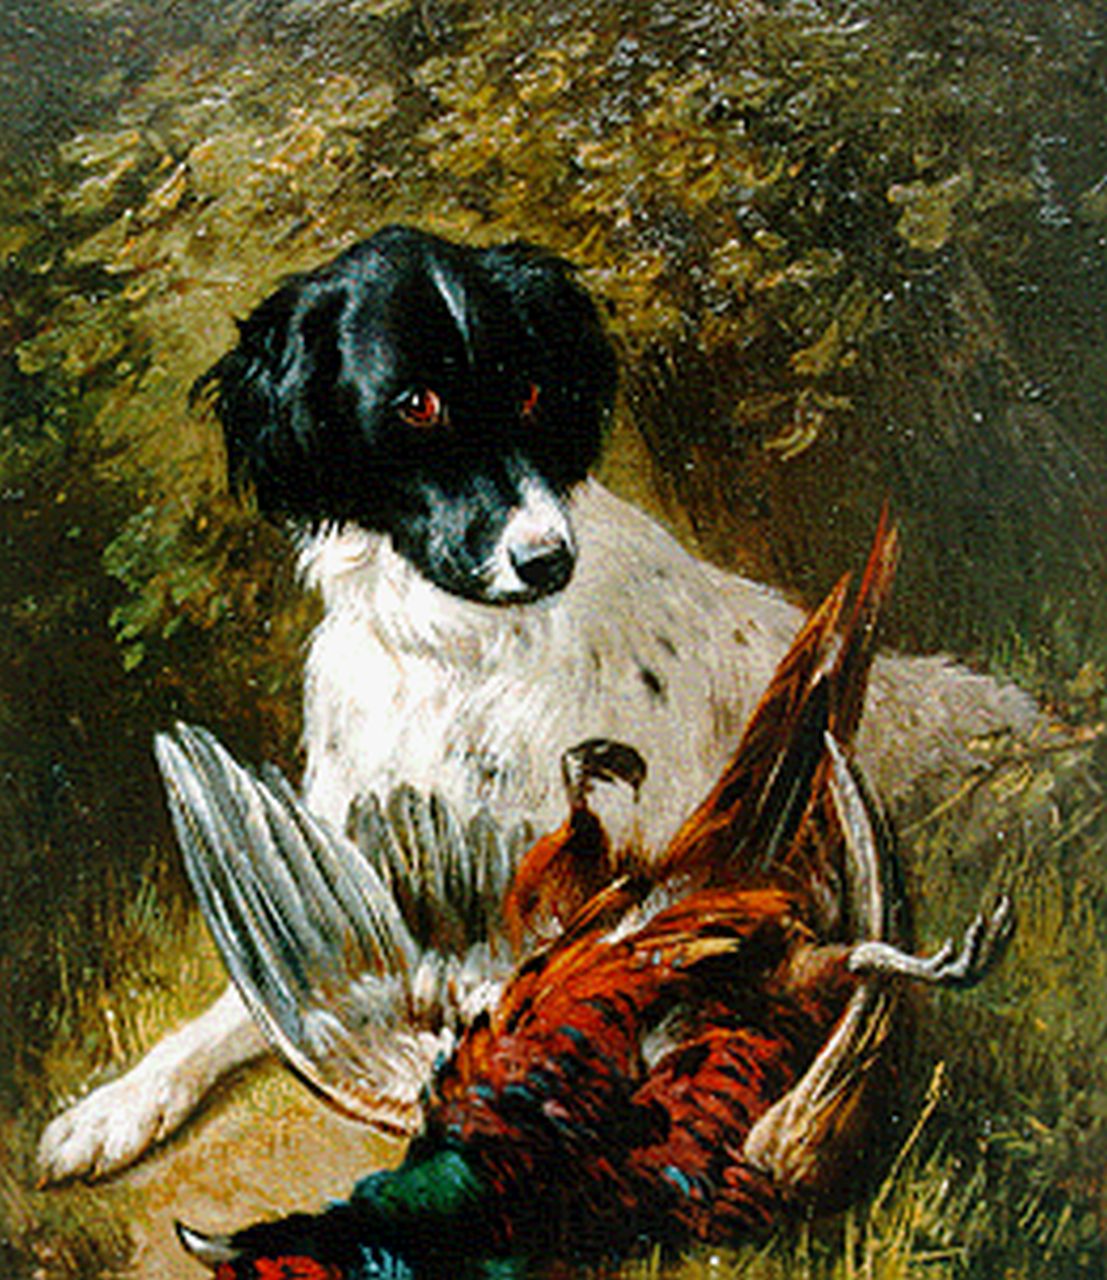 Ronner-Knip H.  | Henriette Ronner-Knip, A good catch, oil on panel 19.5 x 15.8 cm, signed l.r.